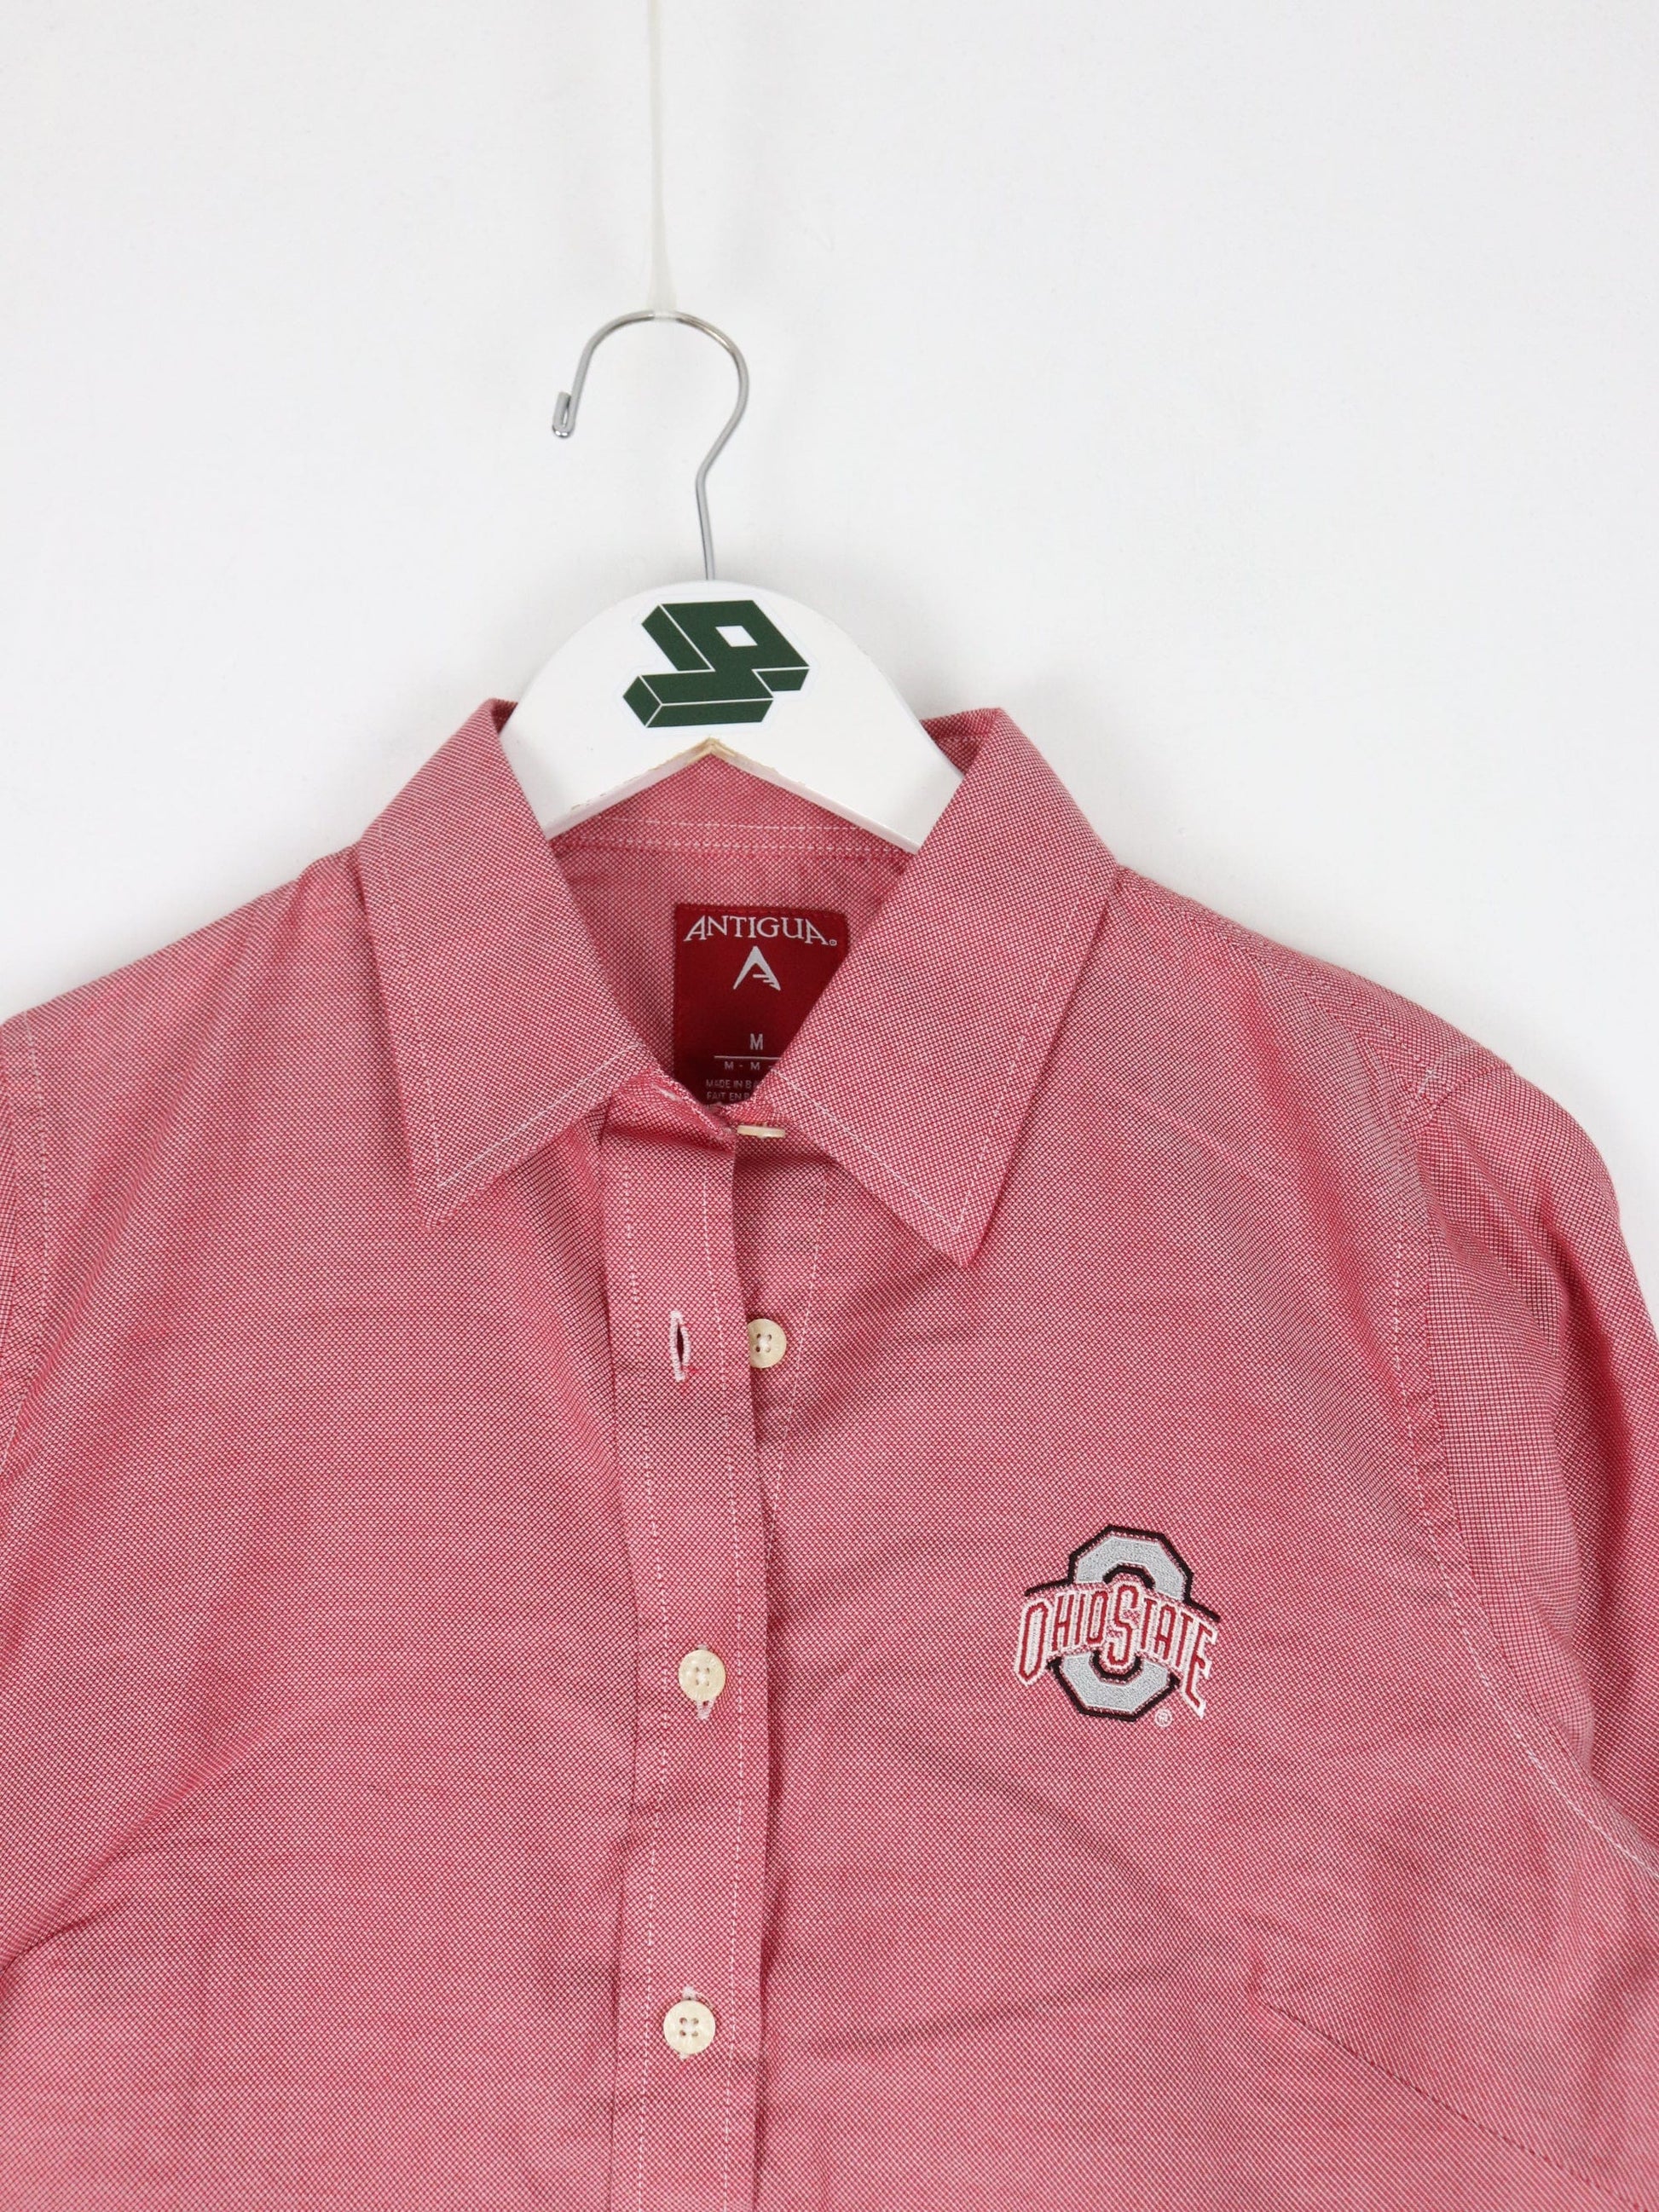 Collegiate Button Up Shirts Ohio State Buckeyes Shirt Mens Medium Red Antigua College Button Up